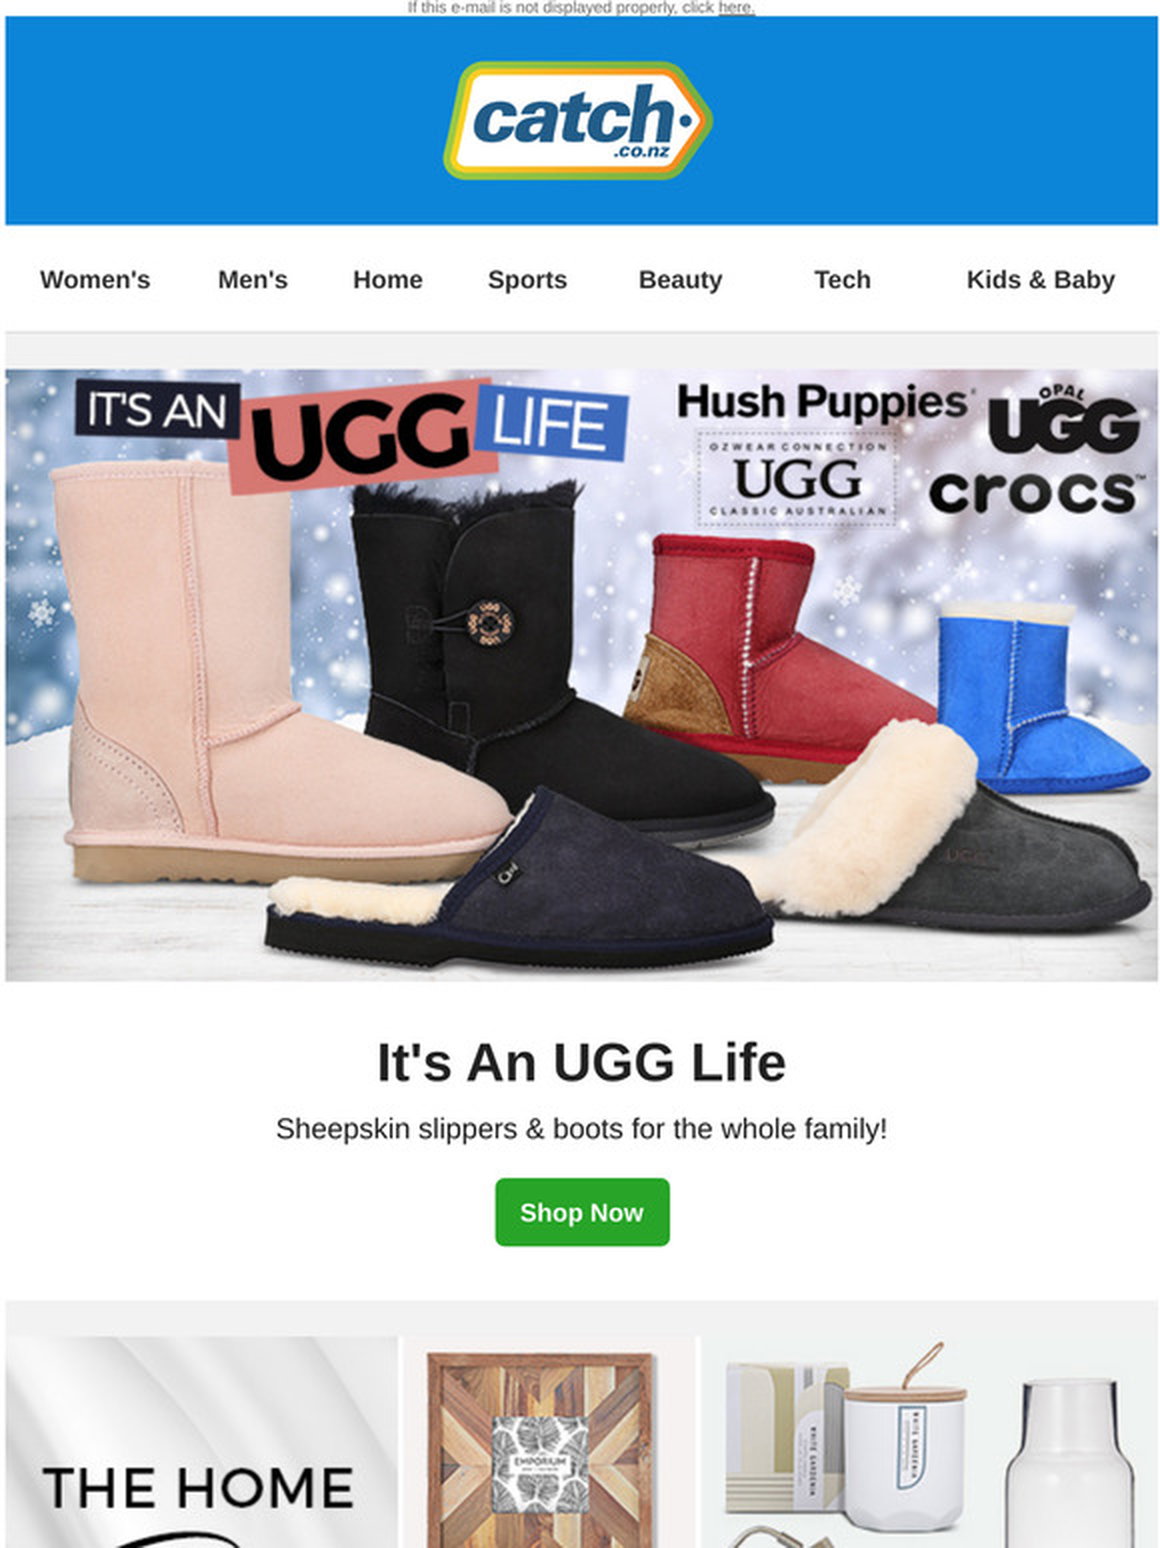 ugg boots catch